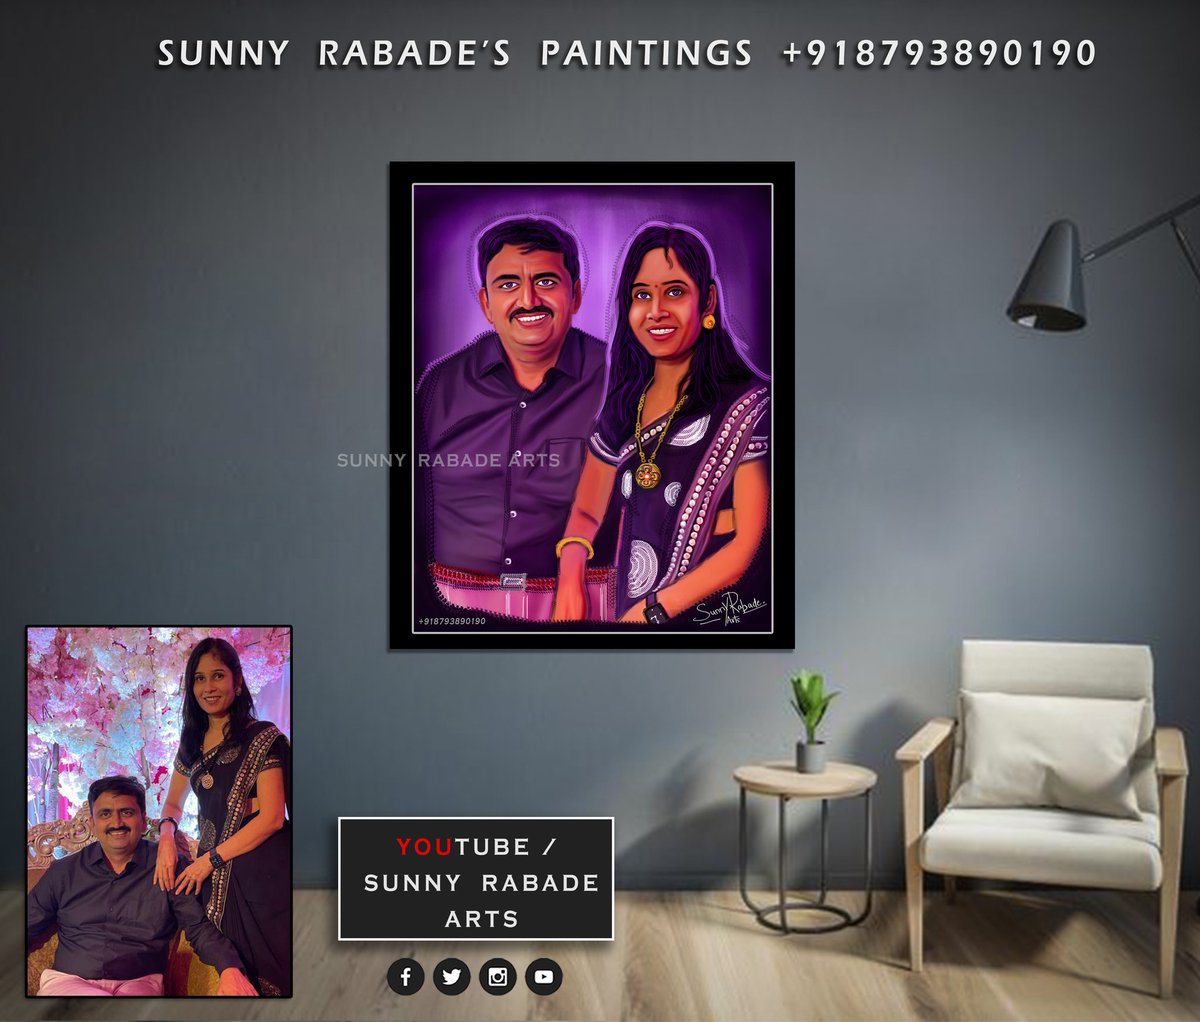 Paid - Commission Painting by : Sunny Rabade Arts 🎨🖌😃 

Contact for Painting 🎨orders :
Mob / Whats App : +918793890190 😀 

Subscribe YouTube / Sunny Rabade Arts & Vlogs 

#handpaintings #handmadepaintings #portraitpainting #portraitdrawing #painting #paintings #art #artwork